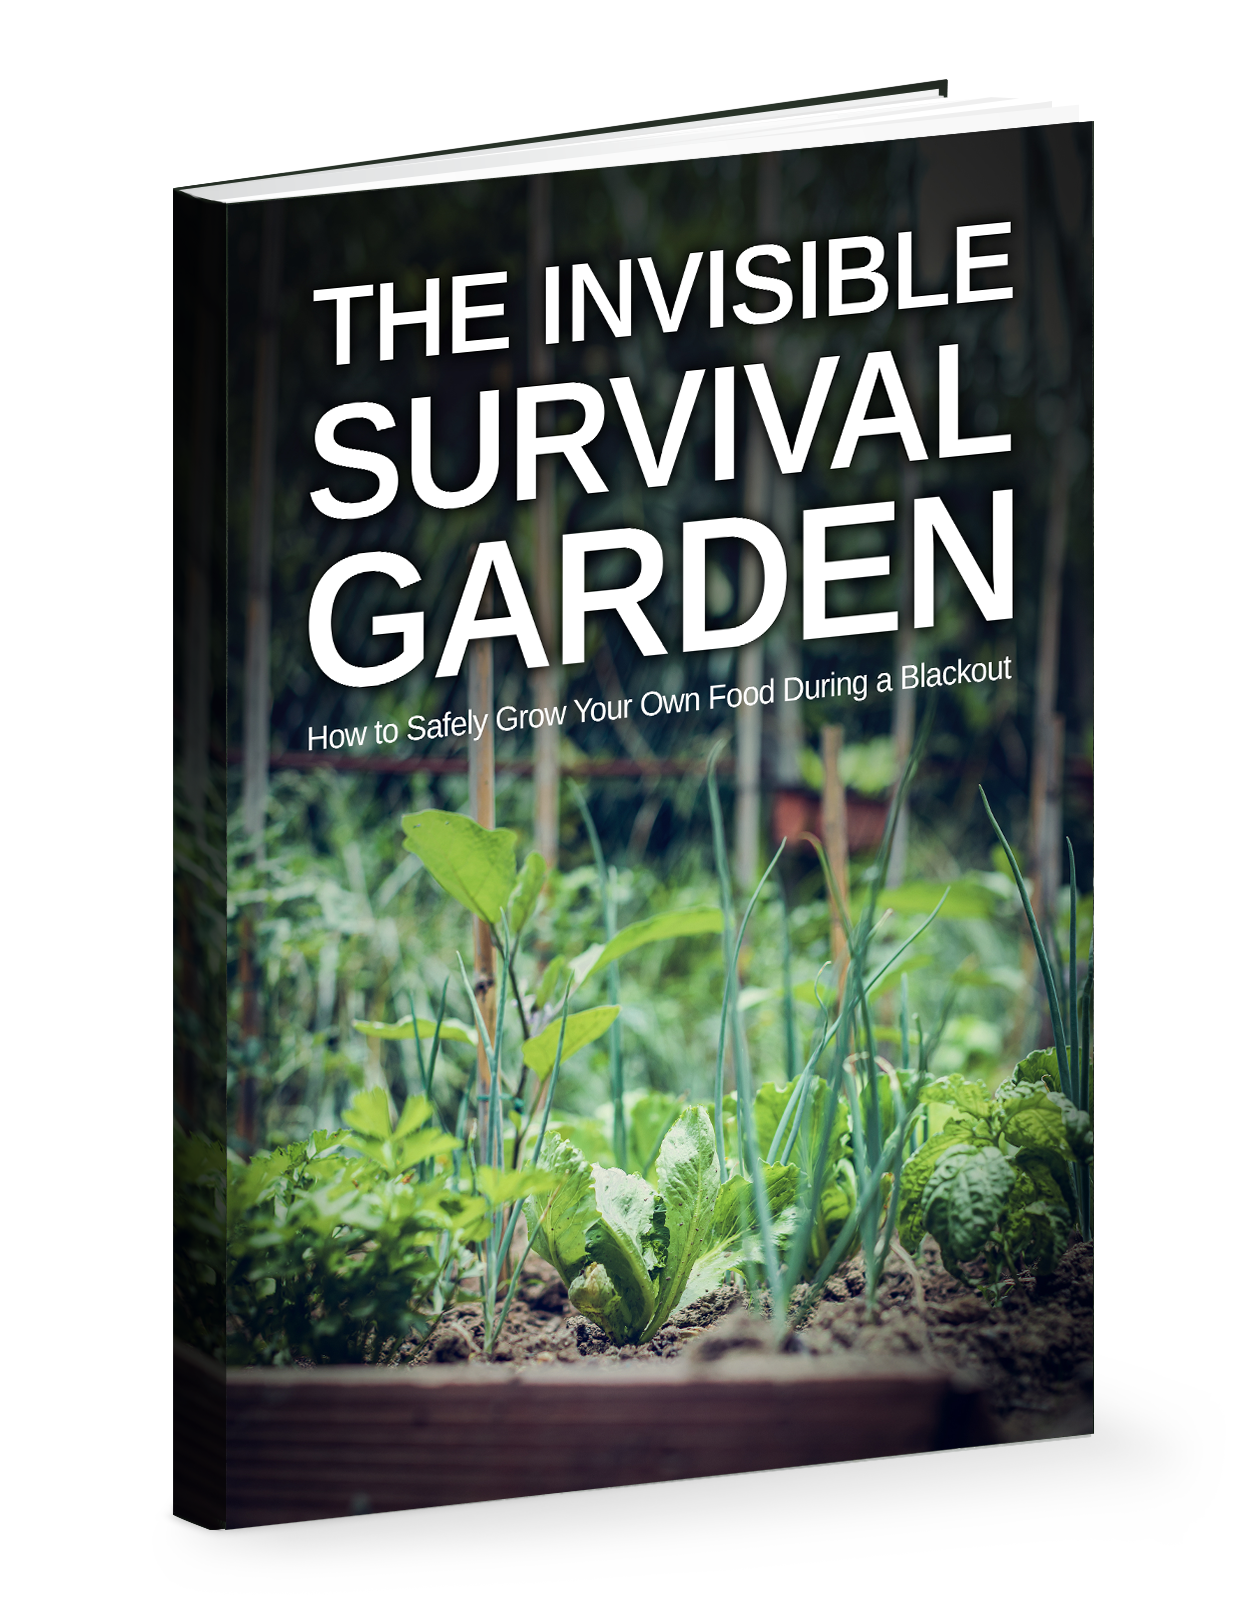 The Invisible Survival Garden: How to Safely Grow Your Food During a Blackout